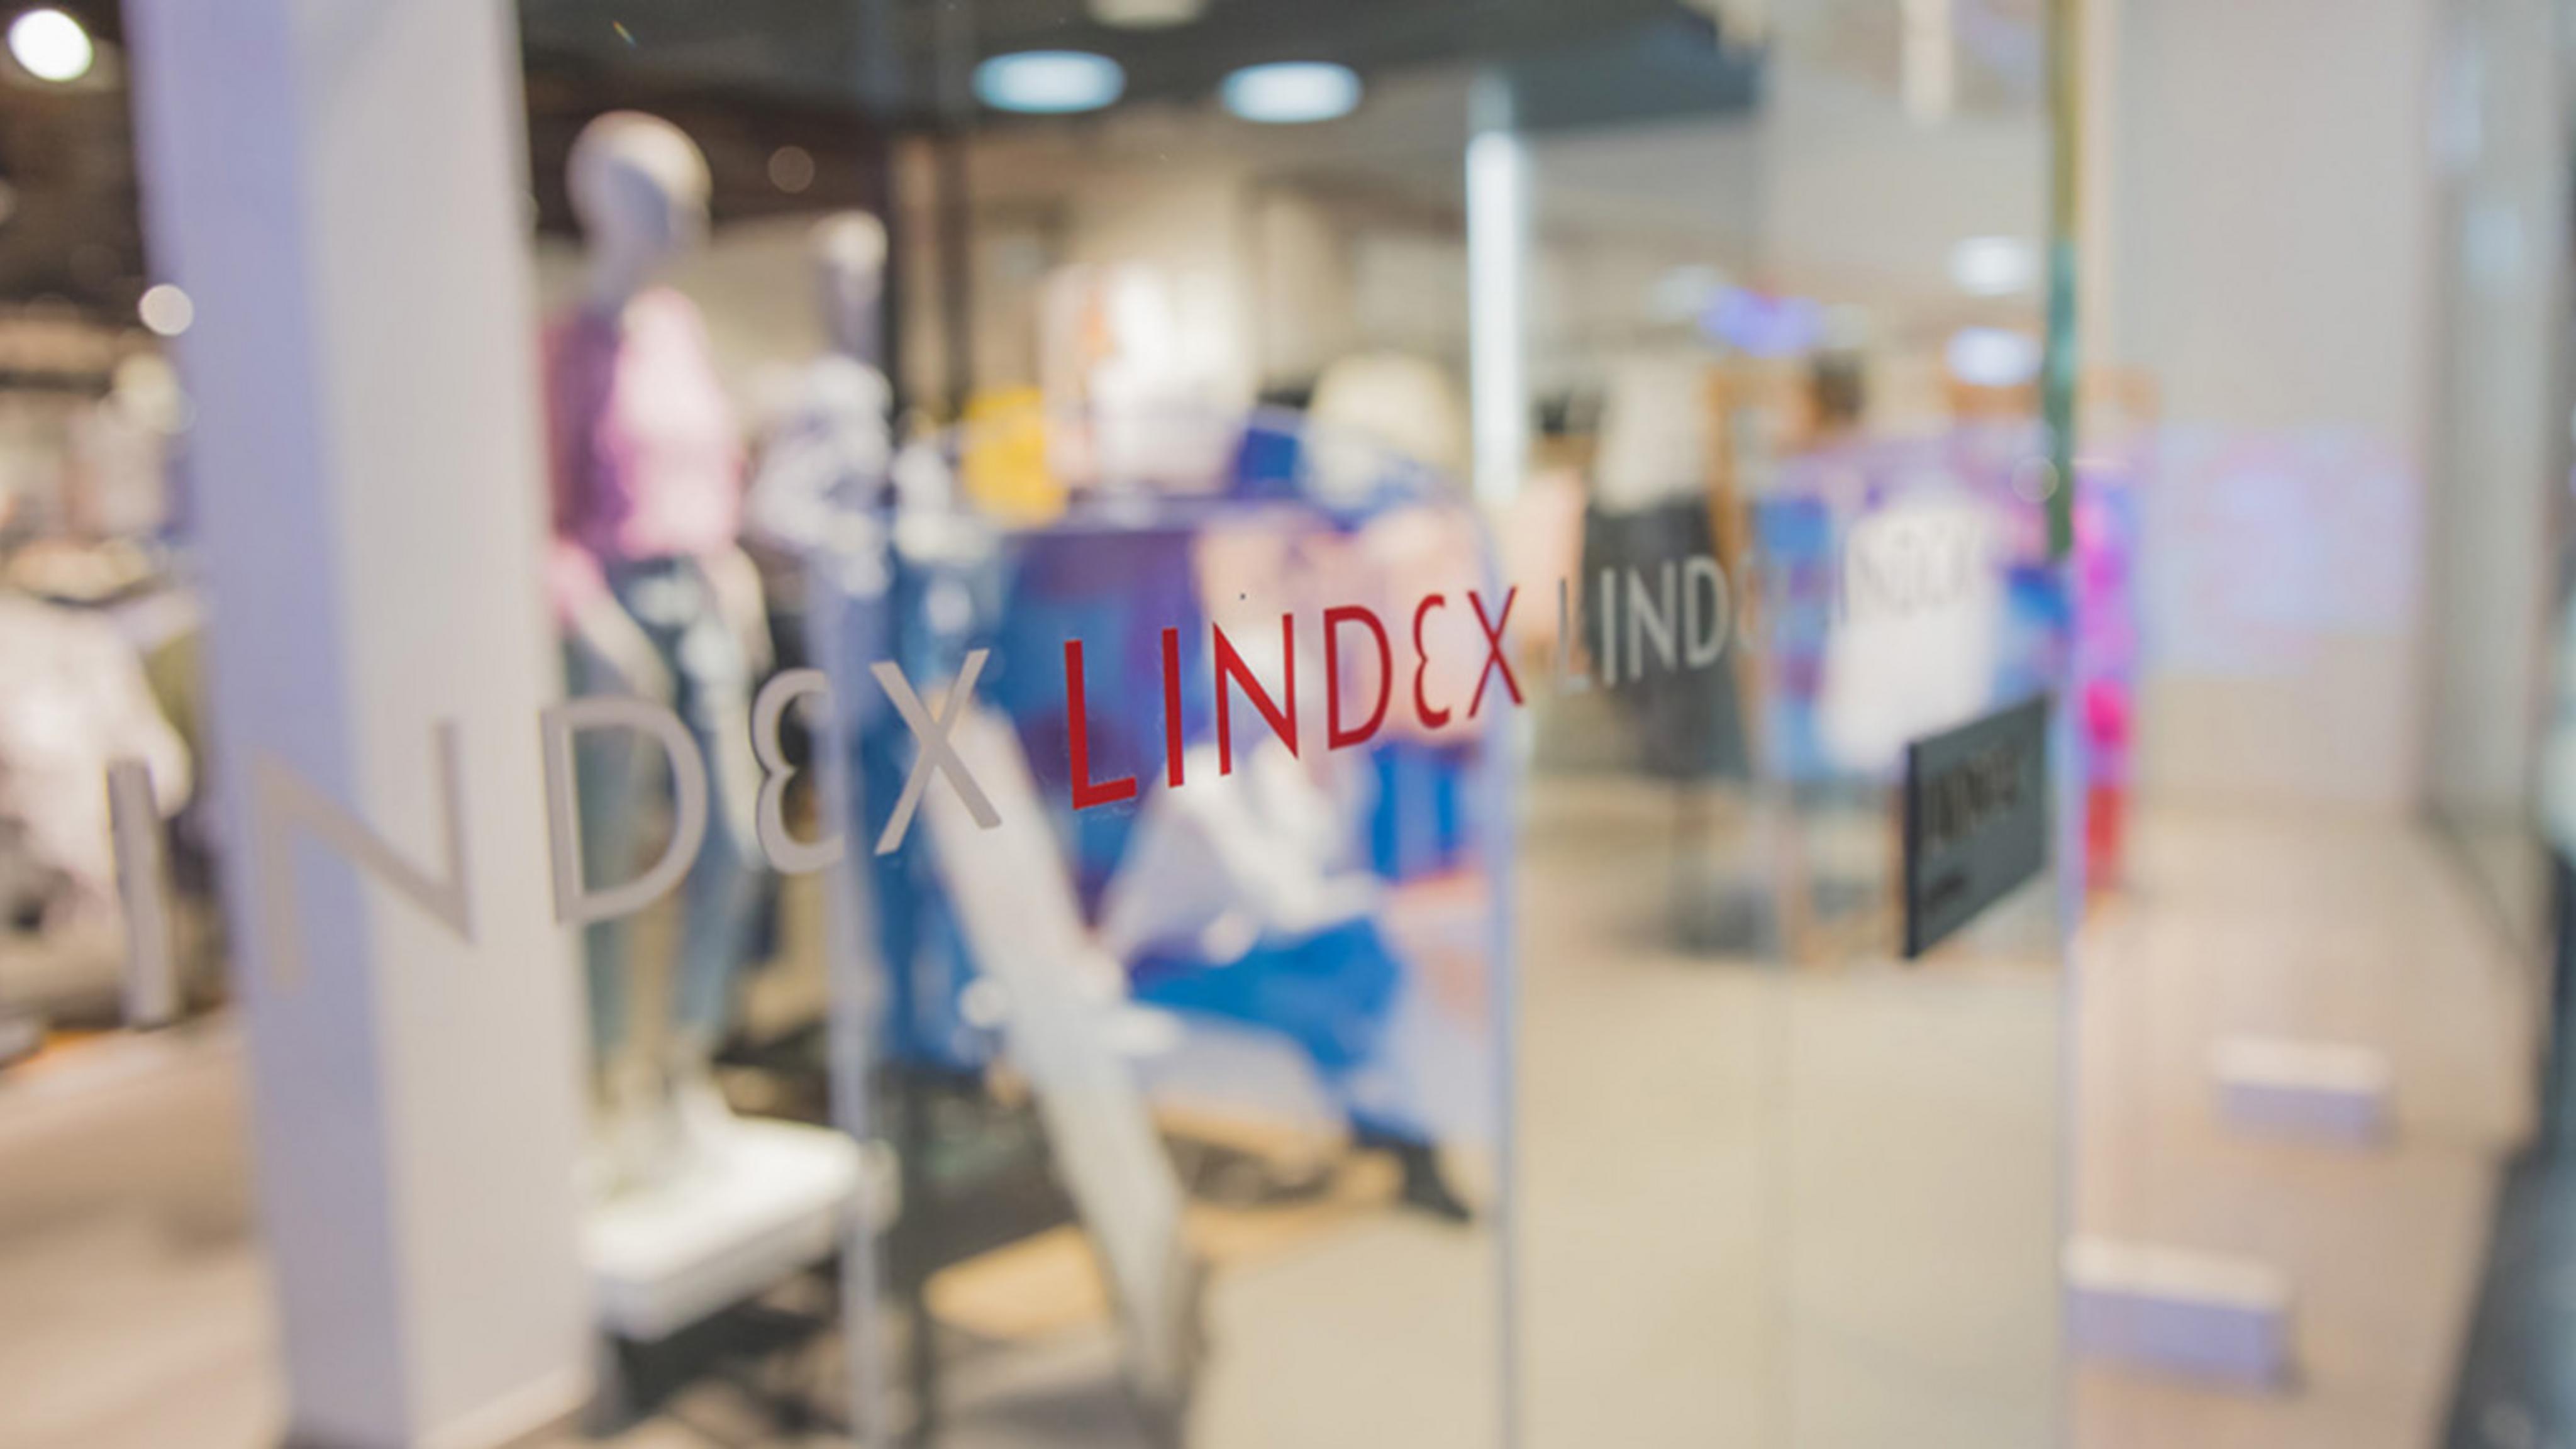 Stockmann could change its name to Lindex Group